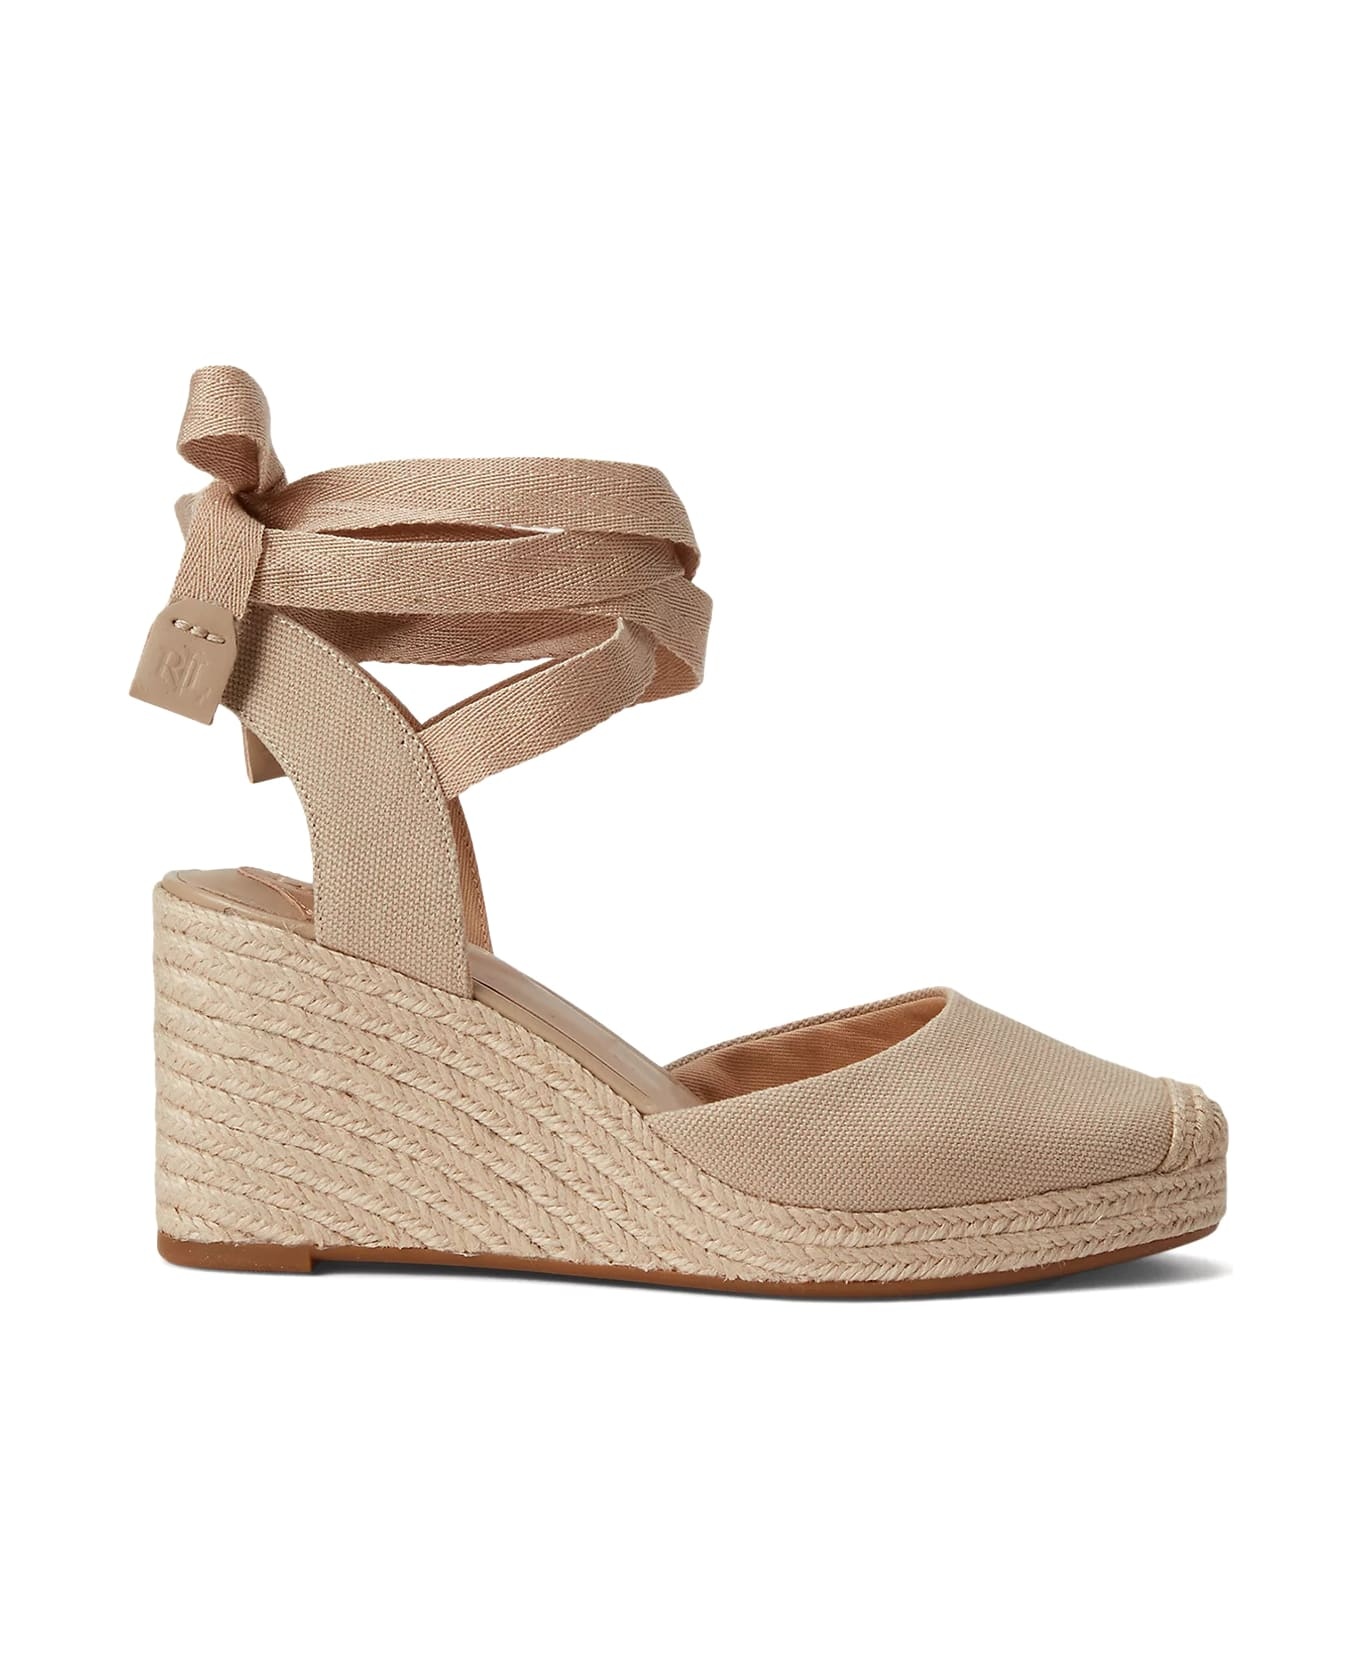 Beige Espadrilles With Ankle Laces - 1